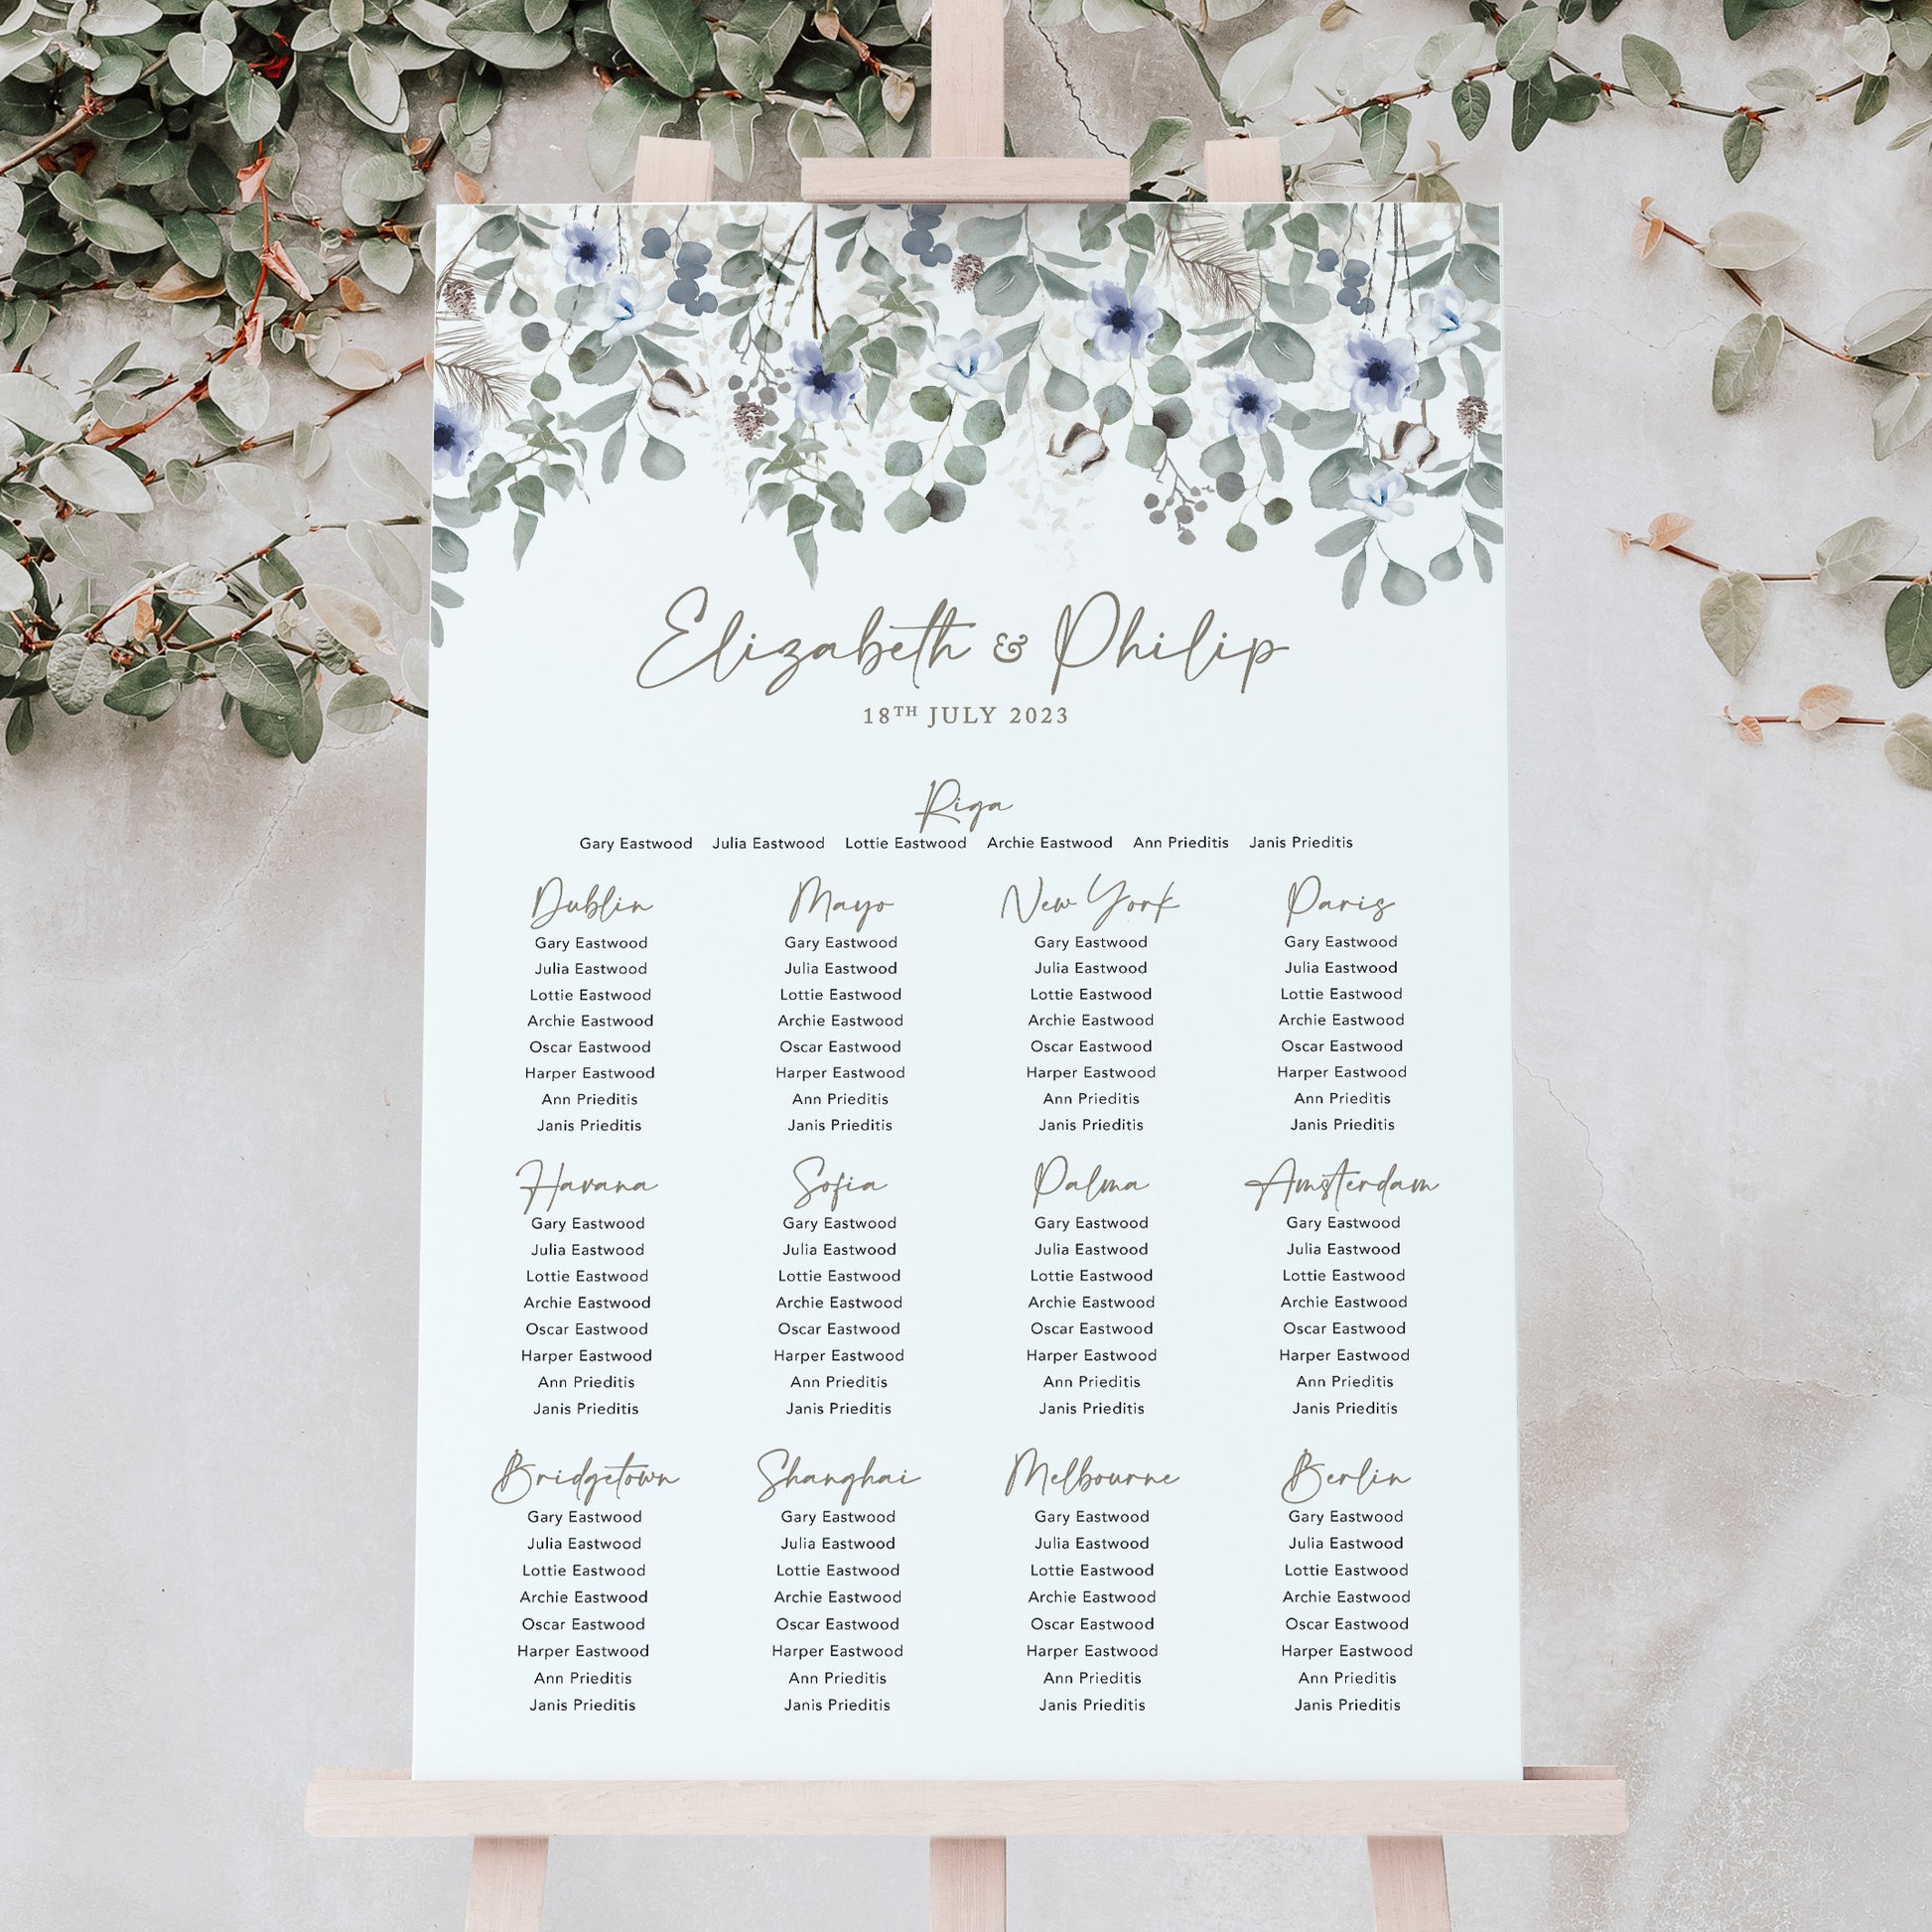 Sage green foliage and dusky blue wedding table plan for a winter wedding